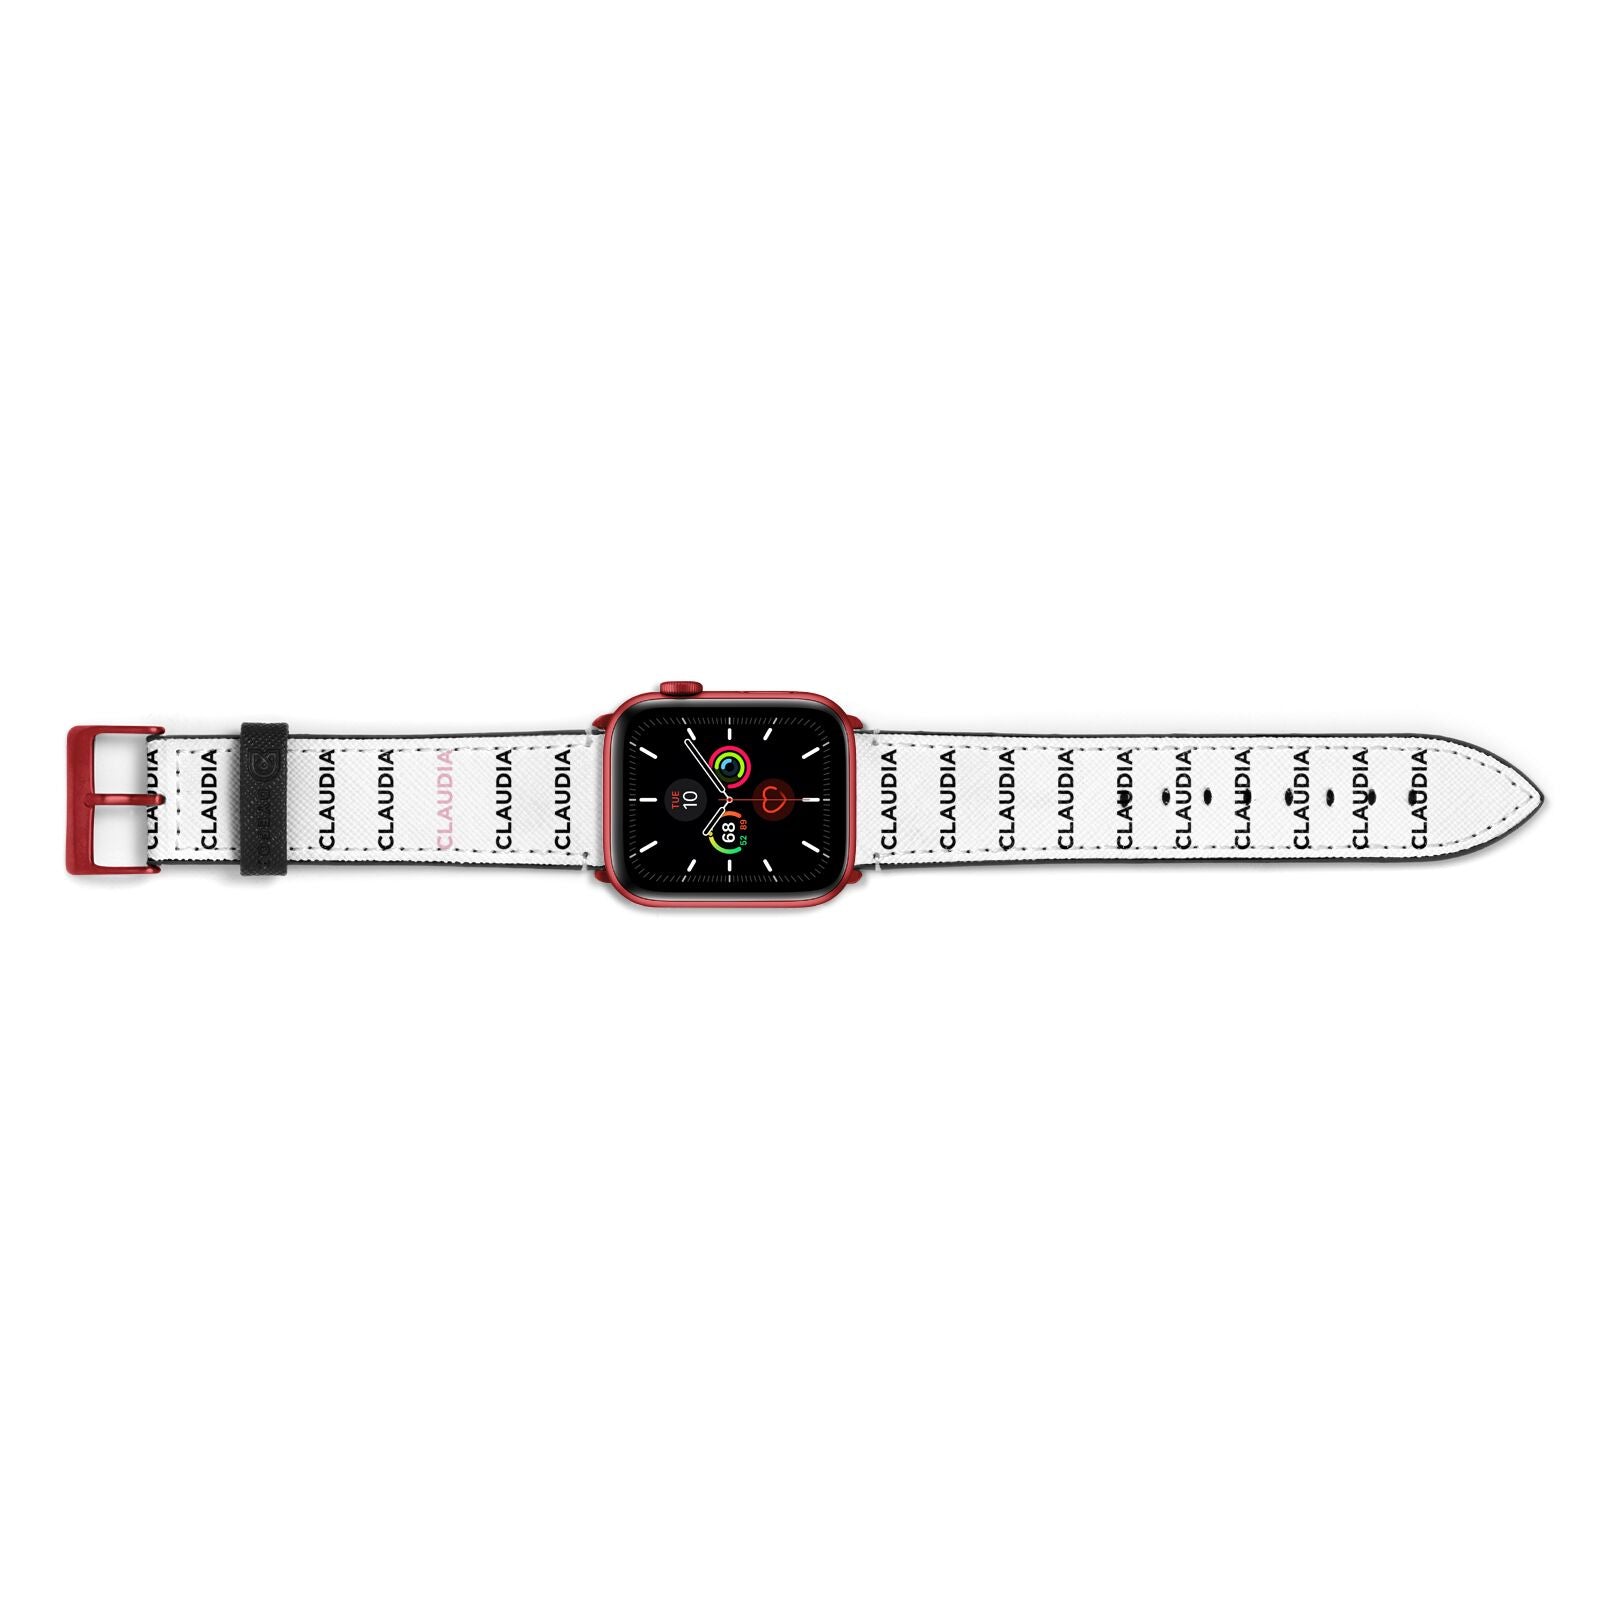 Custom Name Repeat Apple Watch Strap Landscape Image Red Hardware